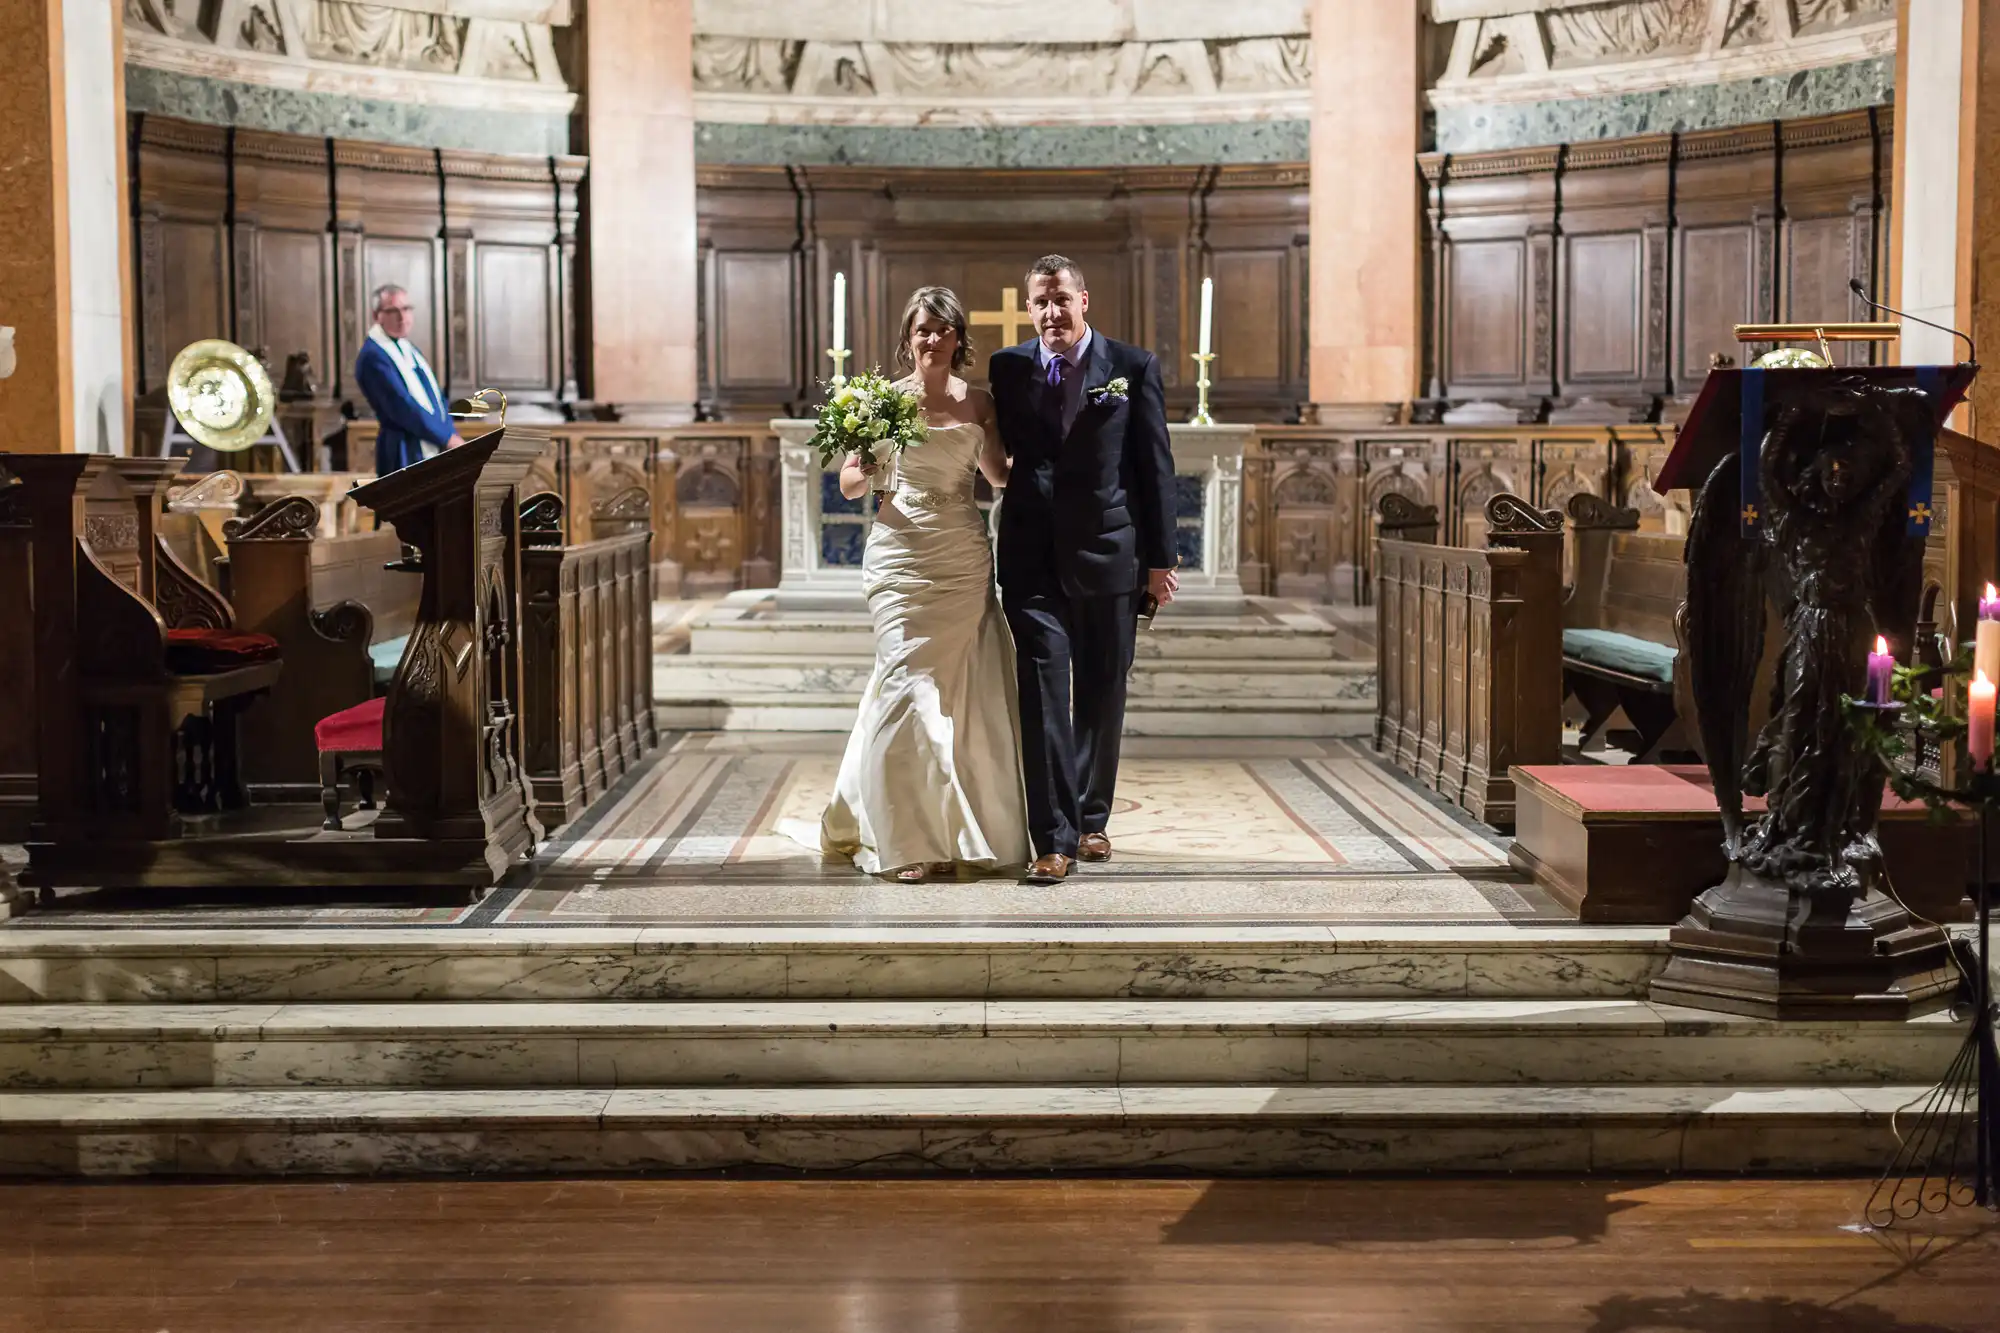 A bride and groom smiling and walking down the aisle of an ornate church, the bride holding a bouquet, with lit candles and guests around.